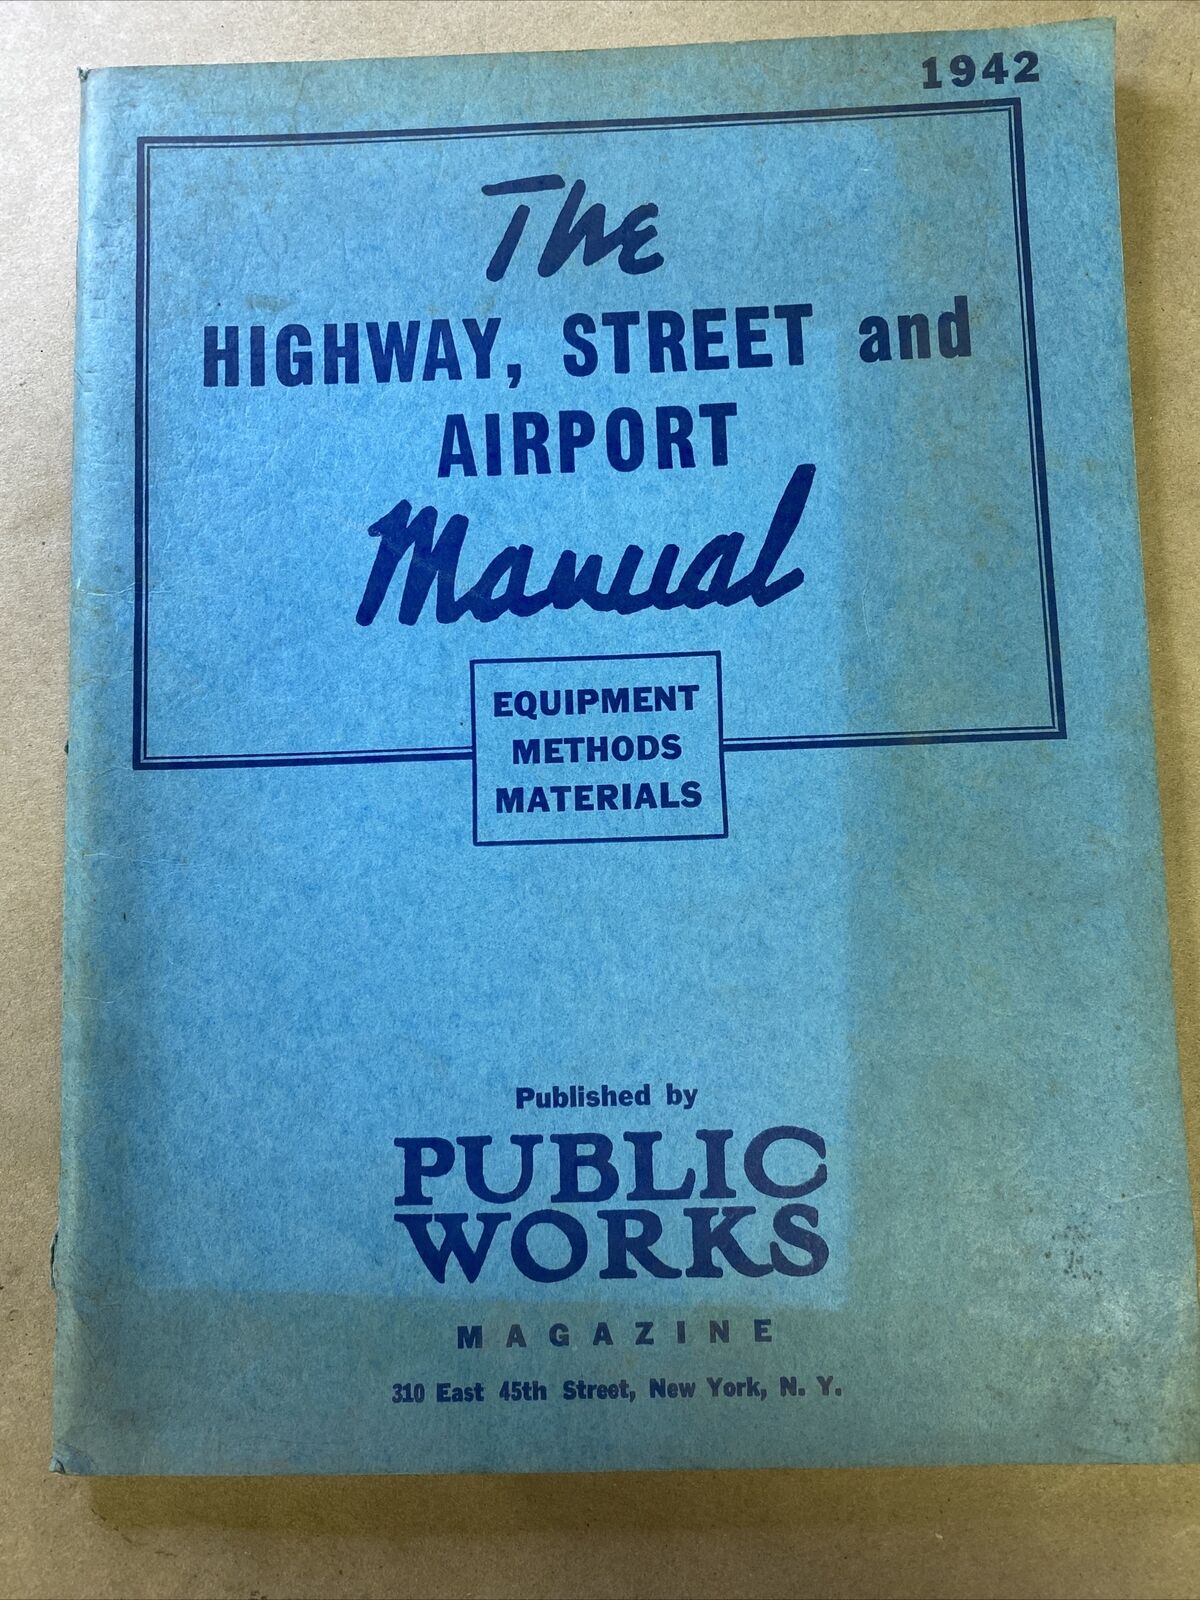 The Highway, Street and Airport Manual